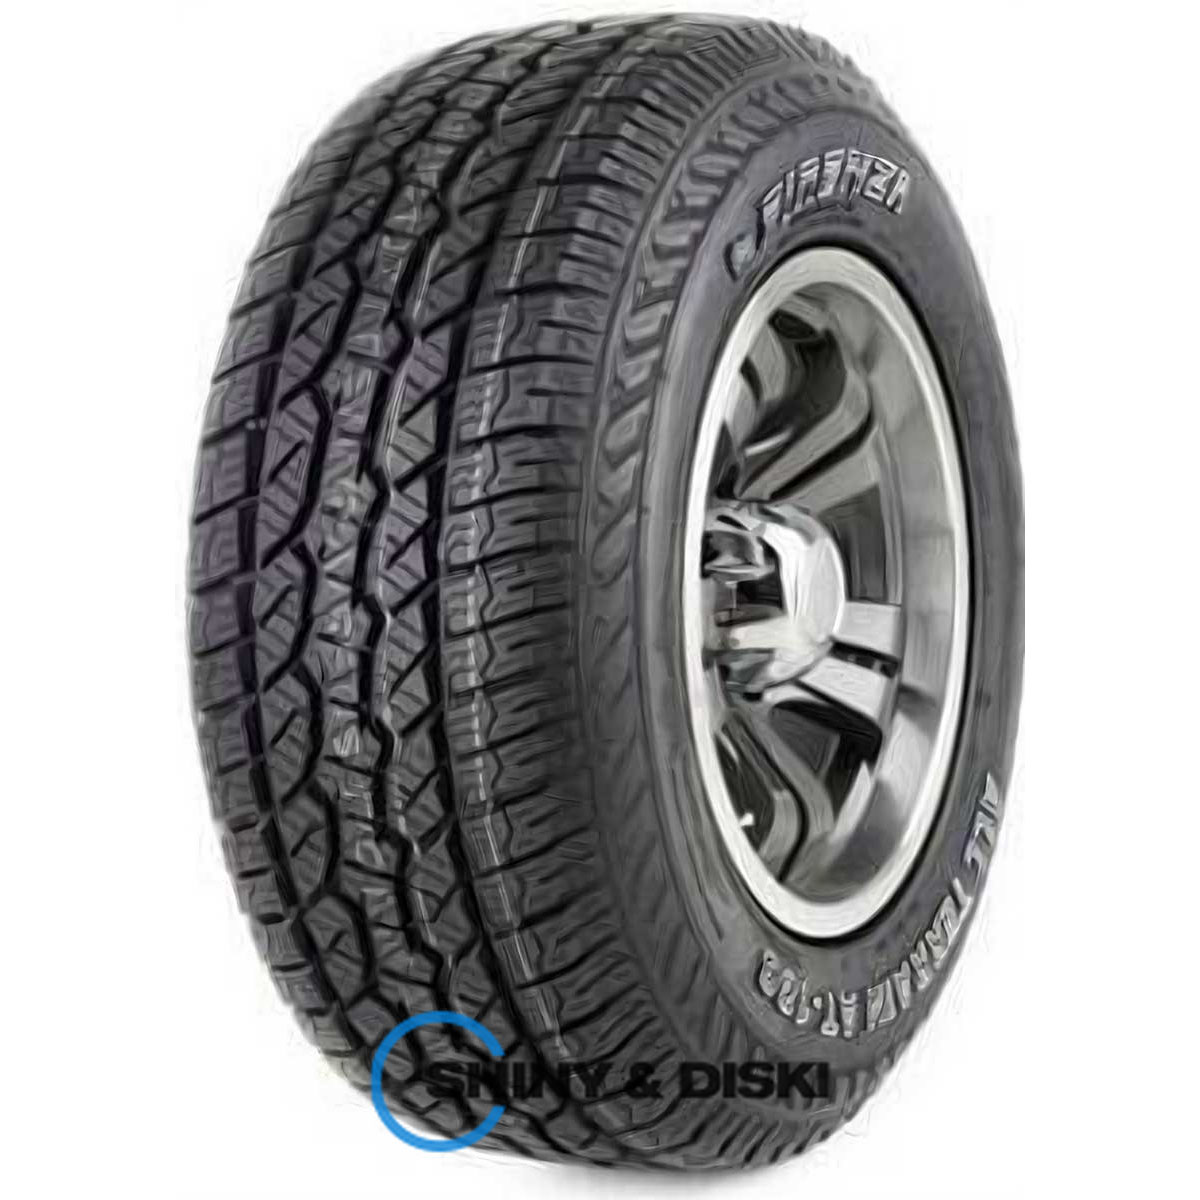 firenza at-186 245/70 r16 107t